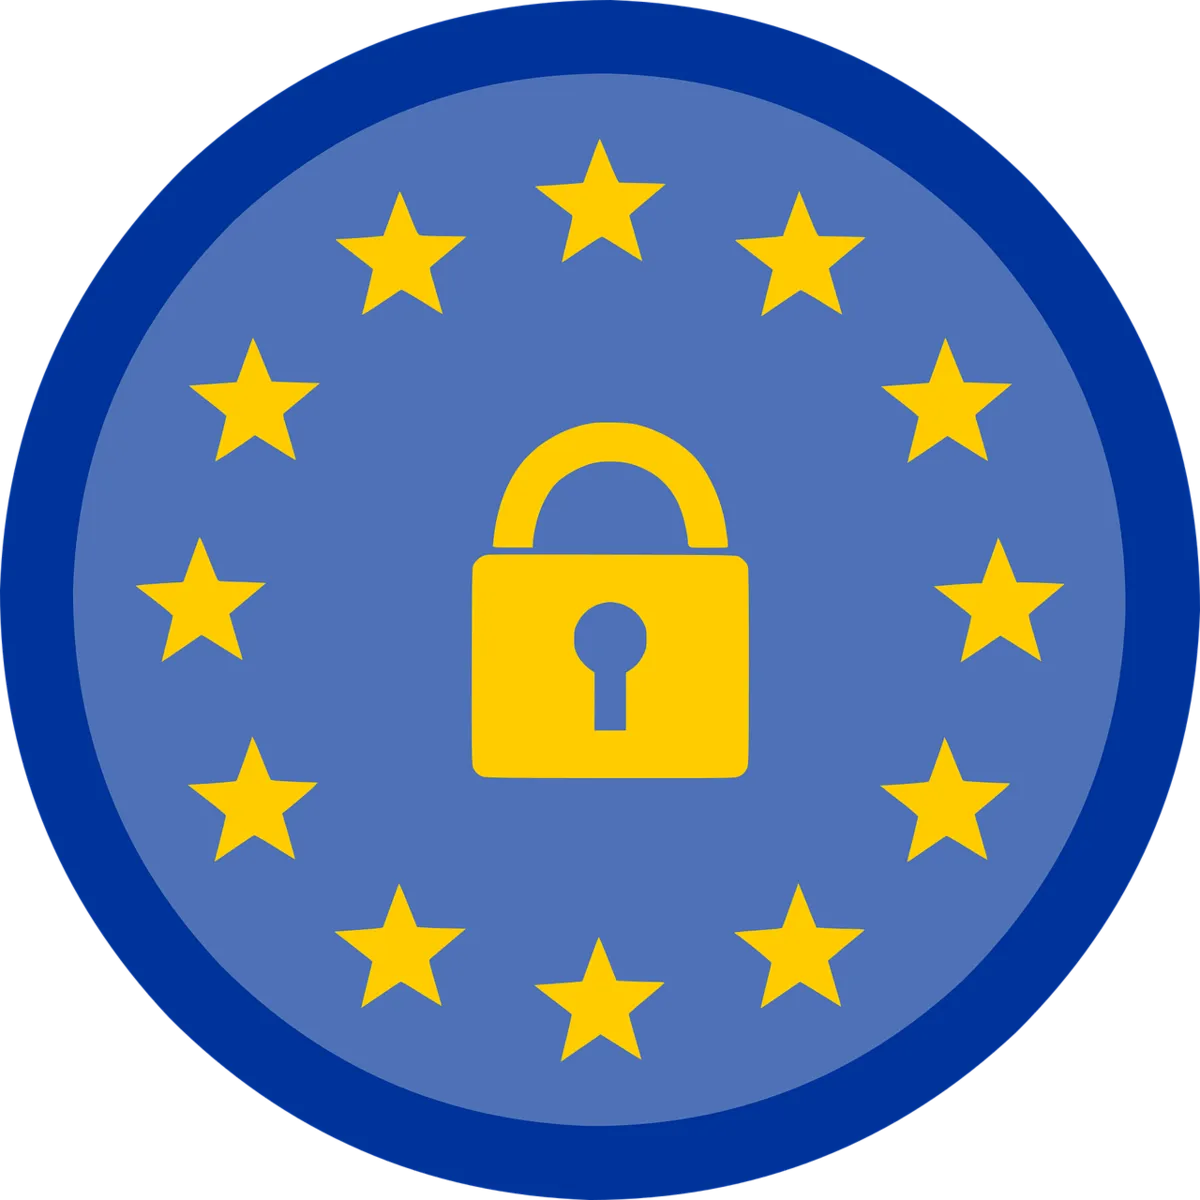 GDPR lock in the middle of the European Union flag